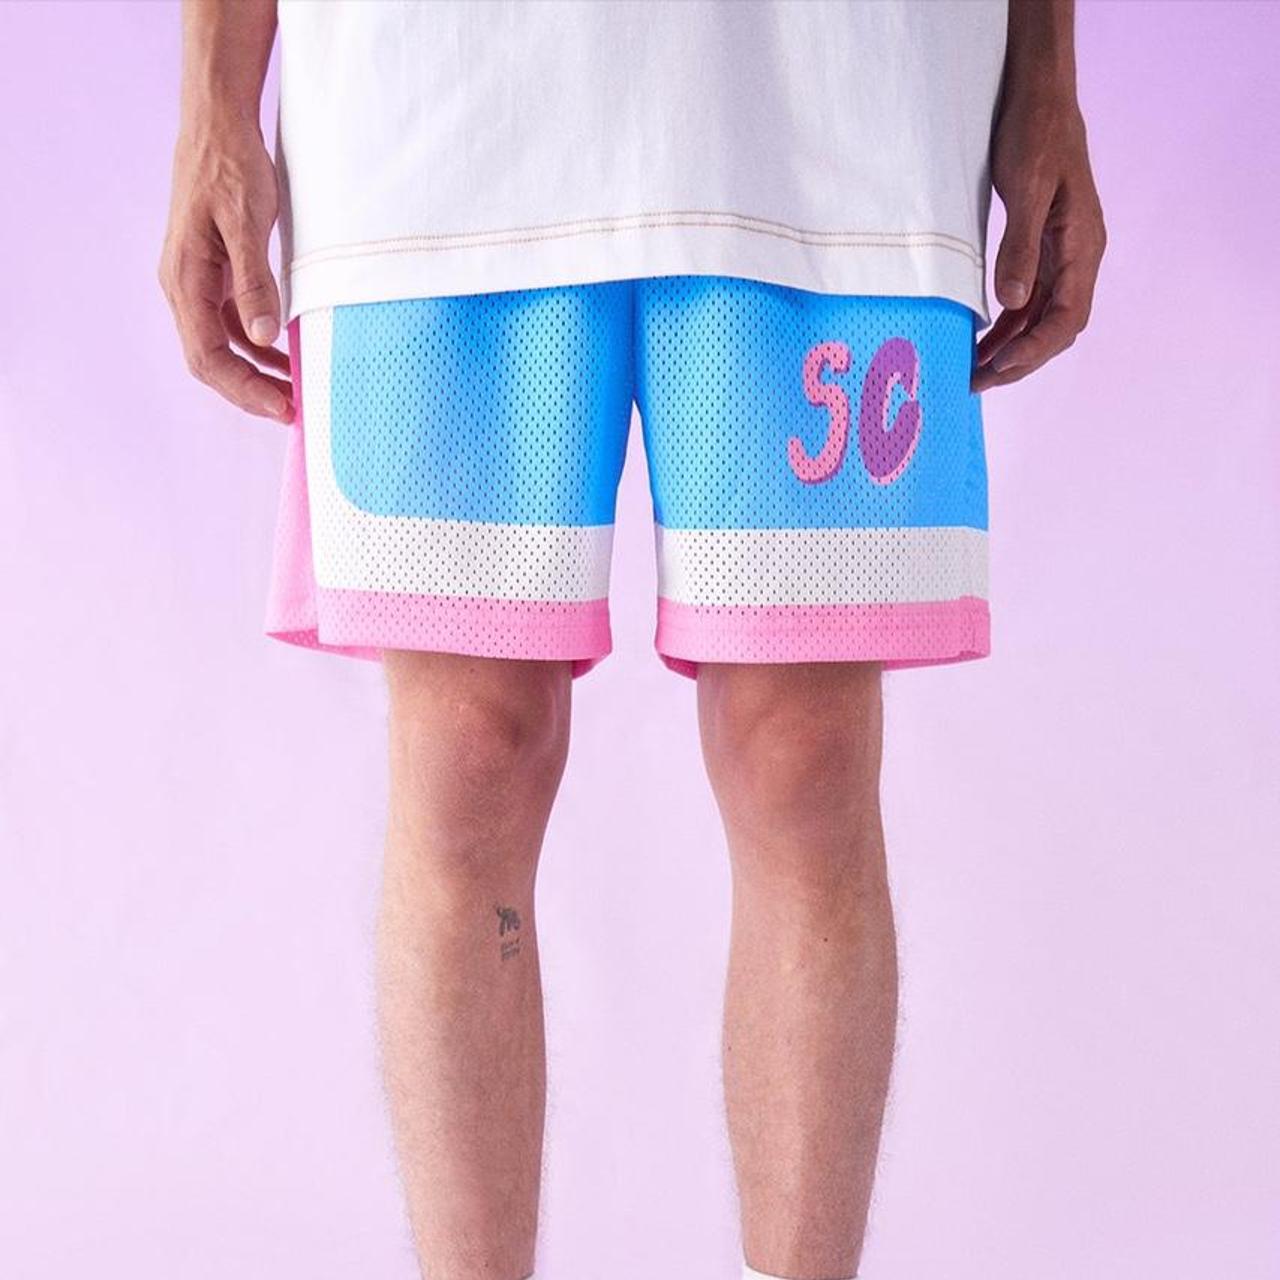 STAY COOL NYC Men's Multi Shorts